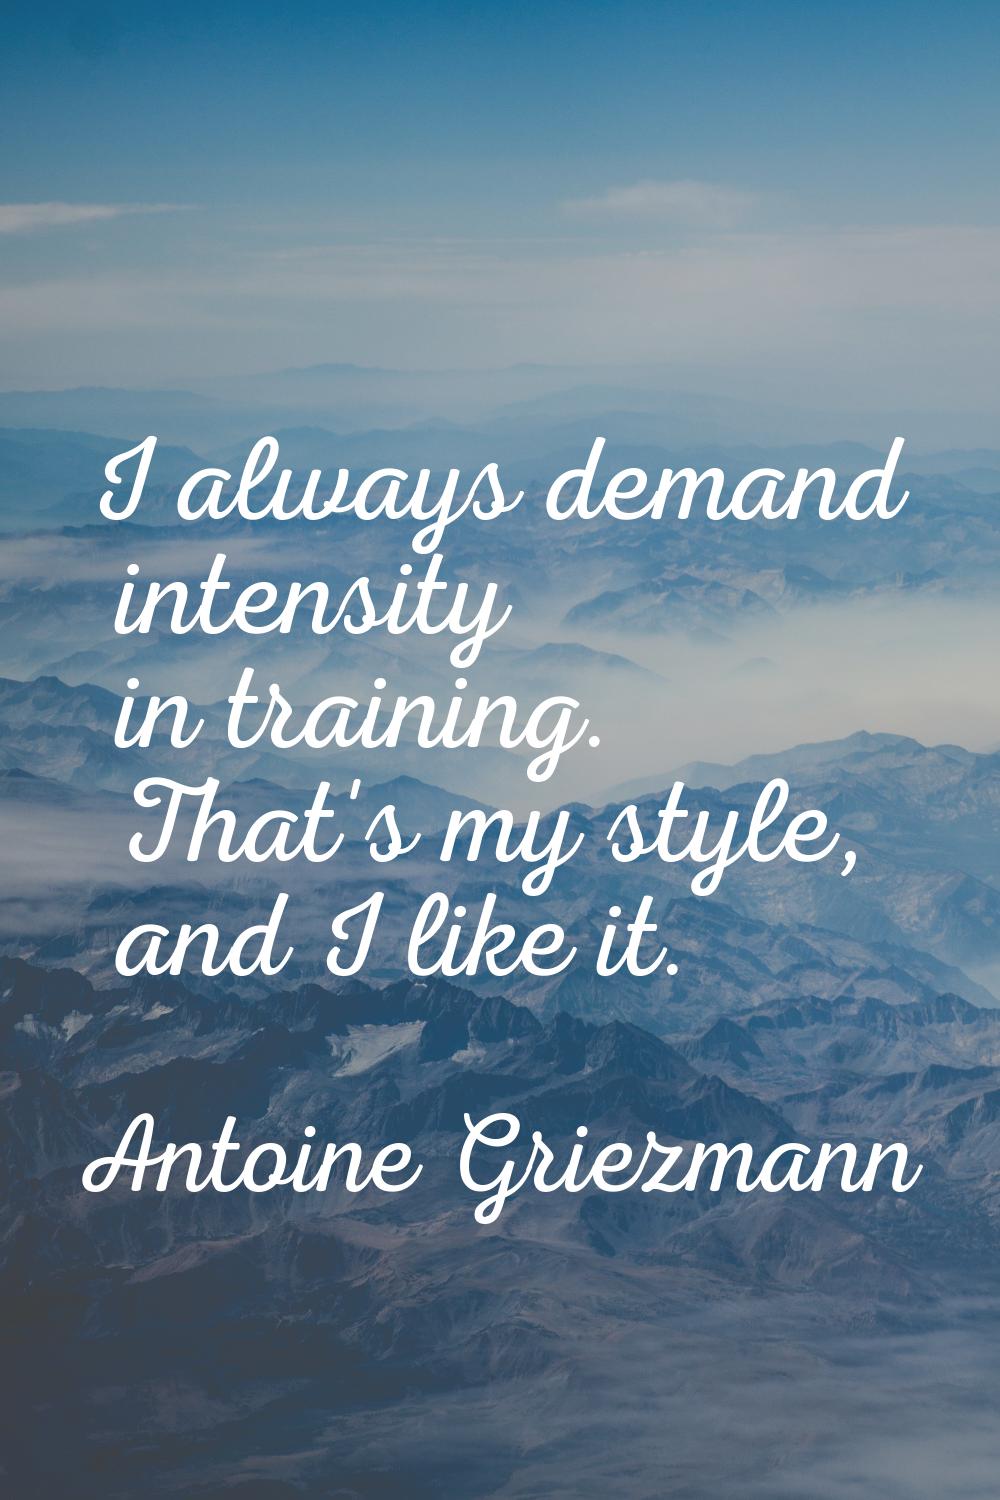 I always demand intensity in training. That's my style, and I like it.